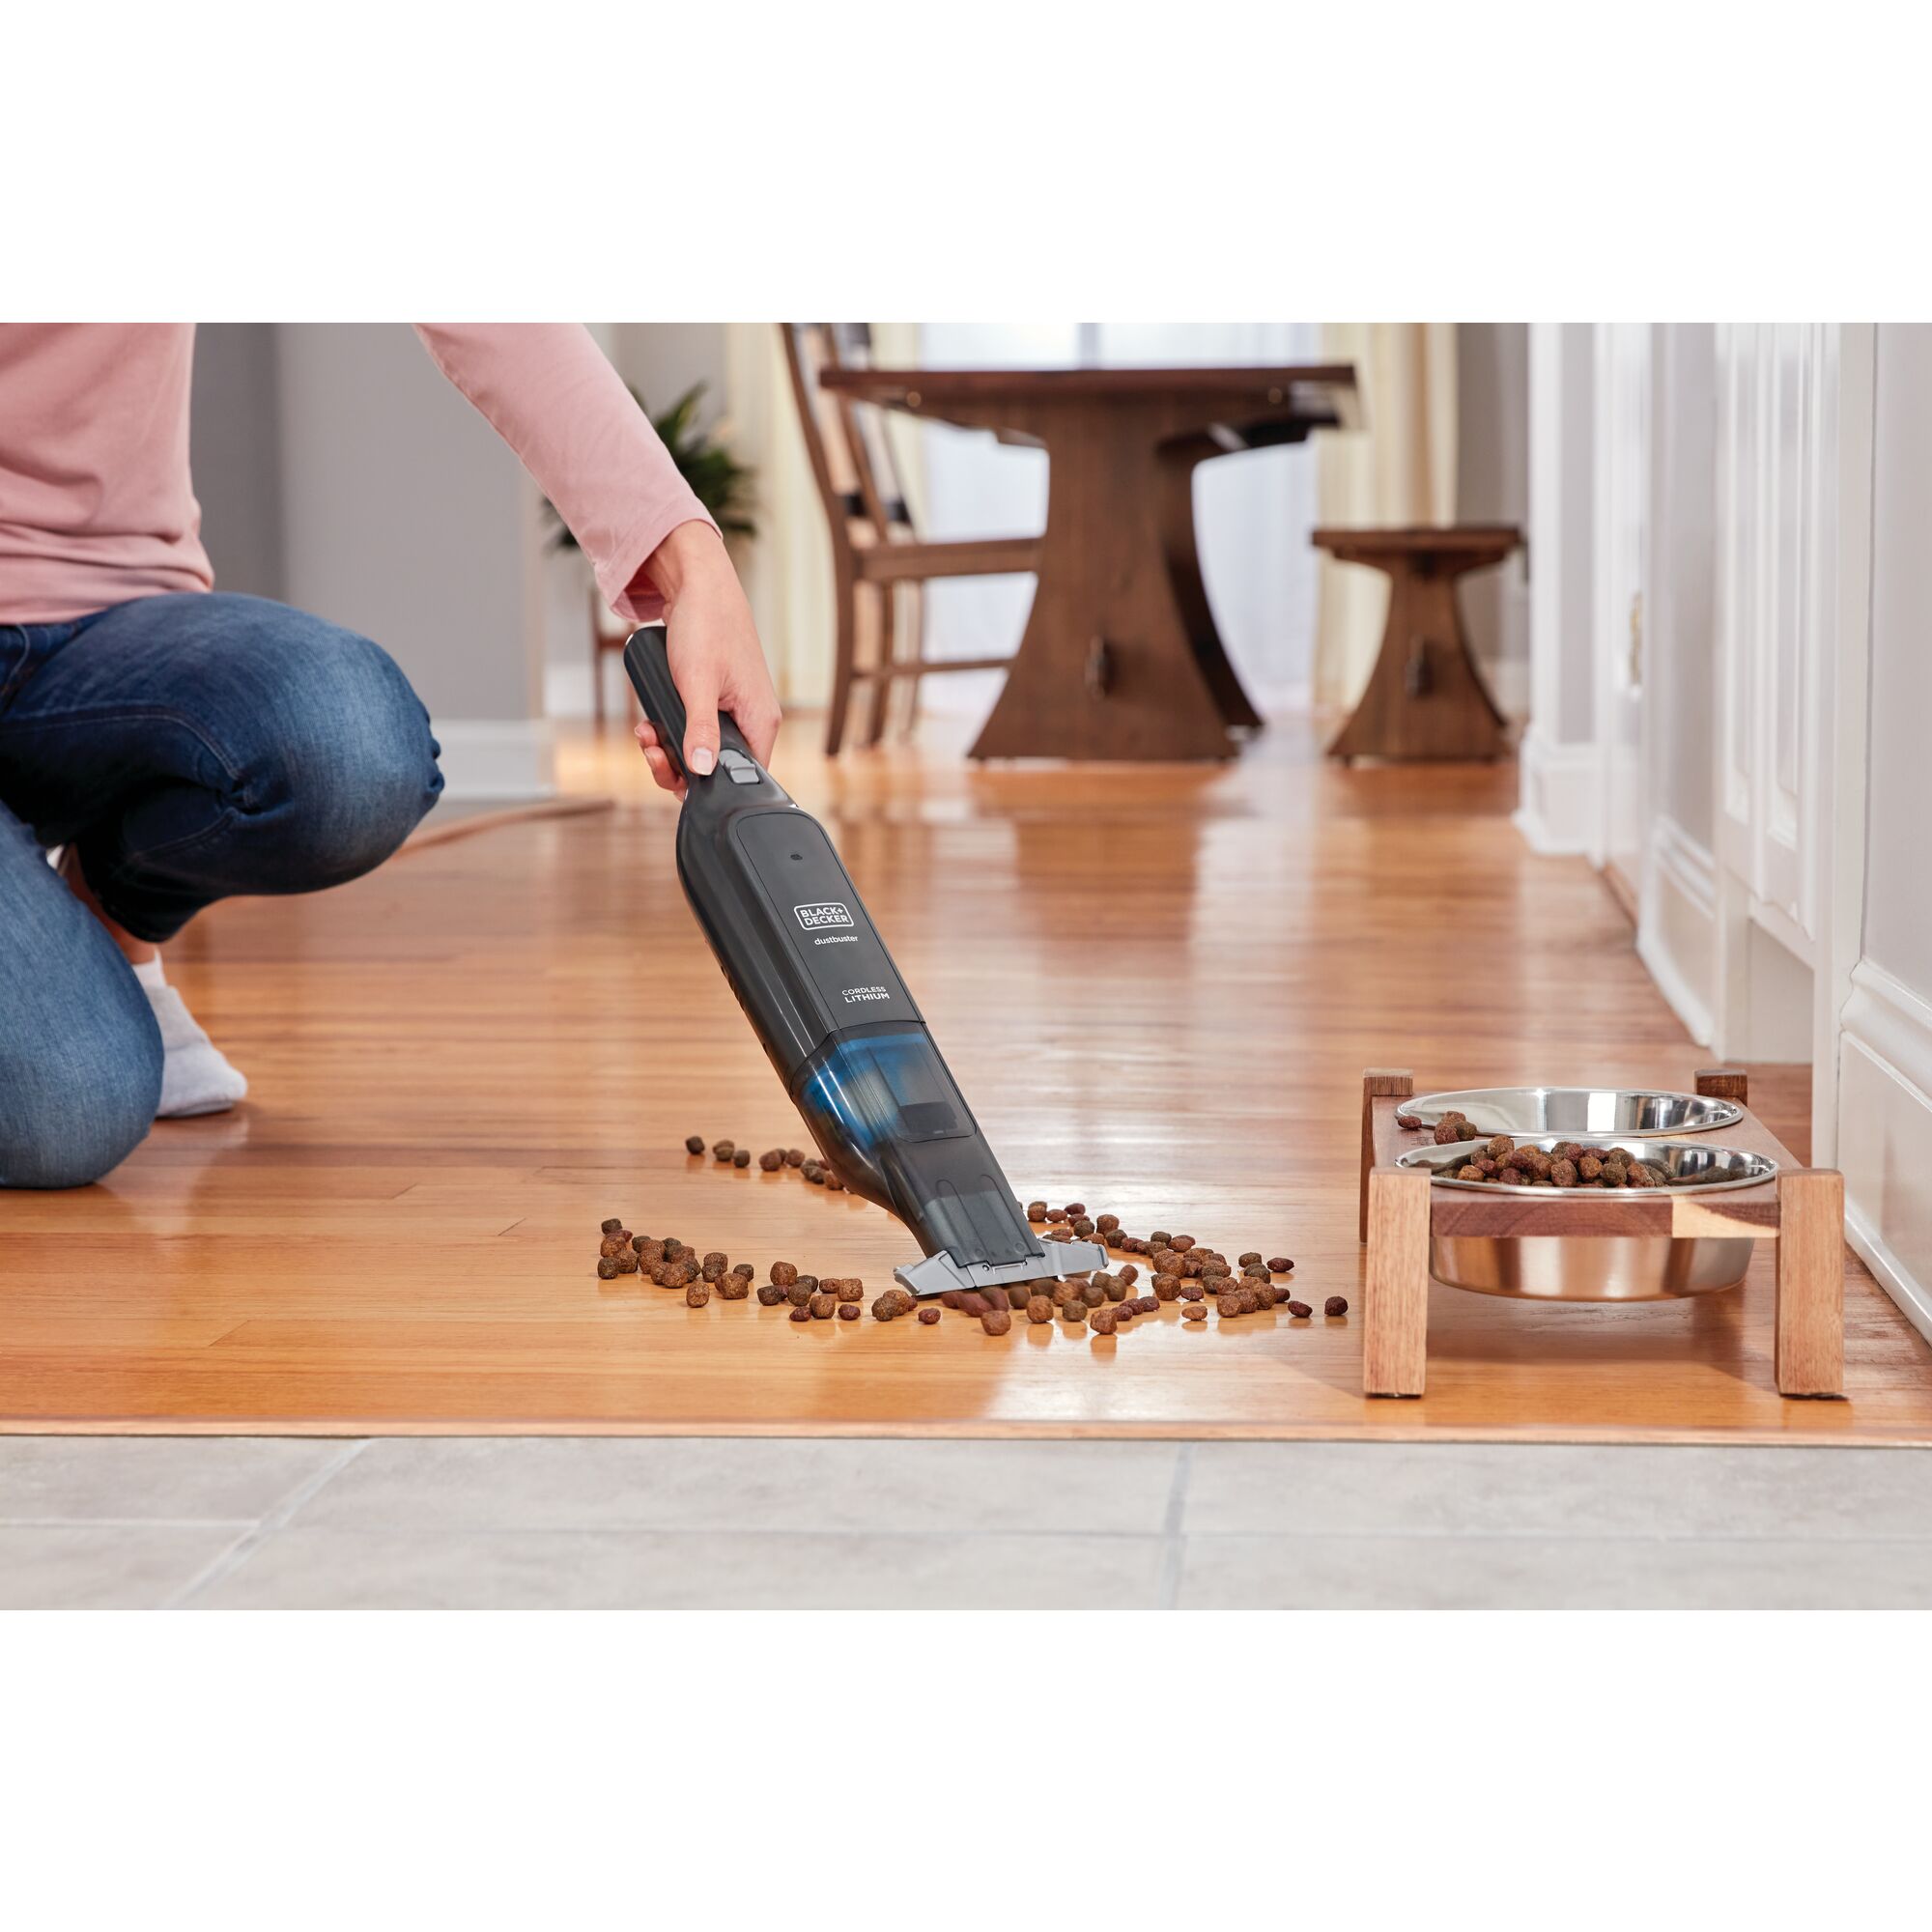 Person cleaning up spilled dog food near dog bowl, with the BLACK+DECKER dustbuster